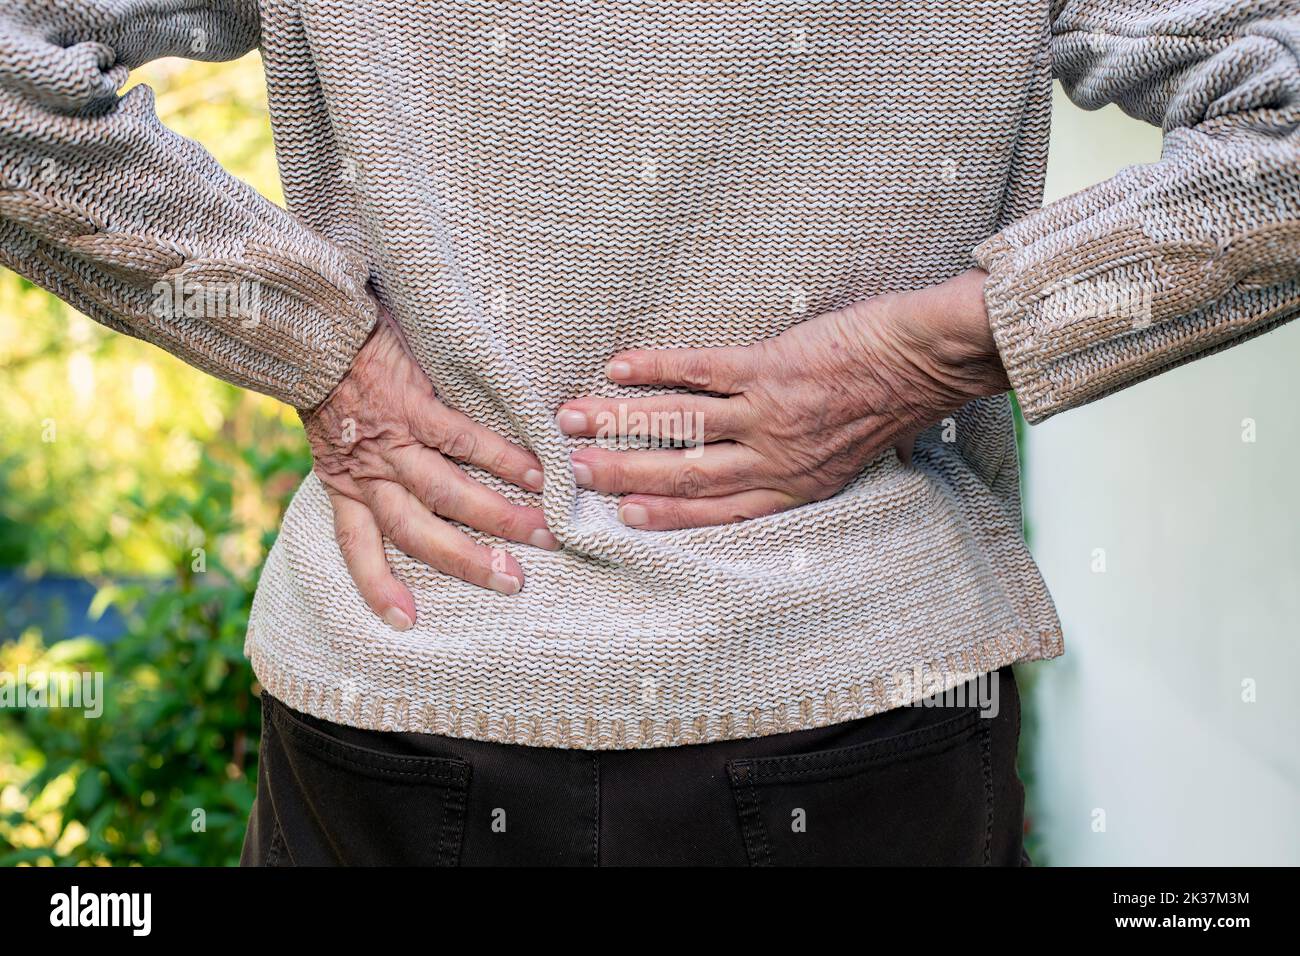 close-up of old woman rubbing her lower back Stock Photo